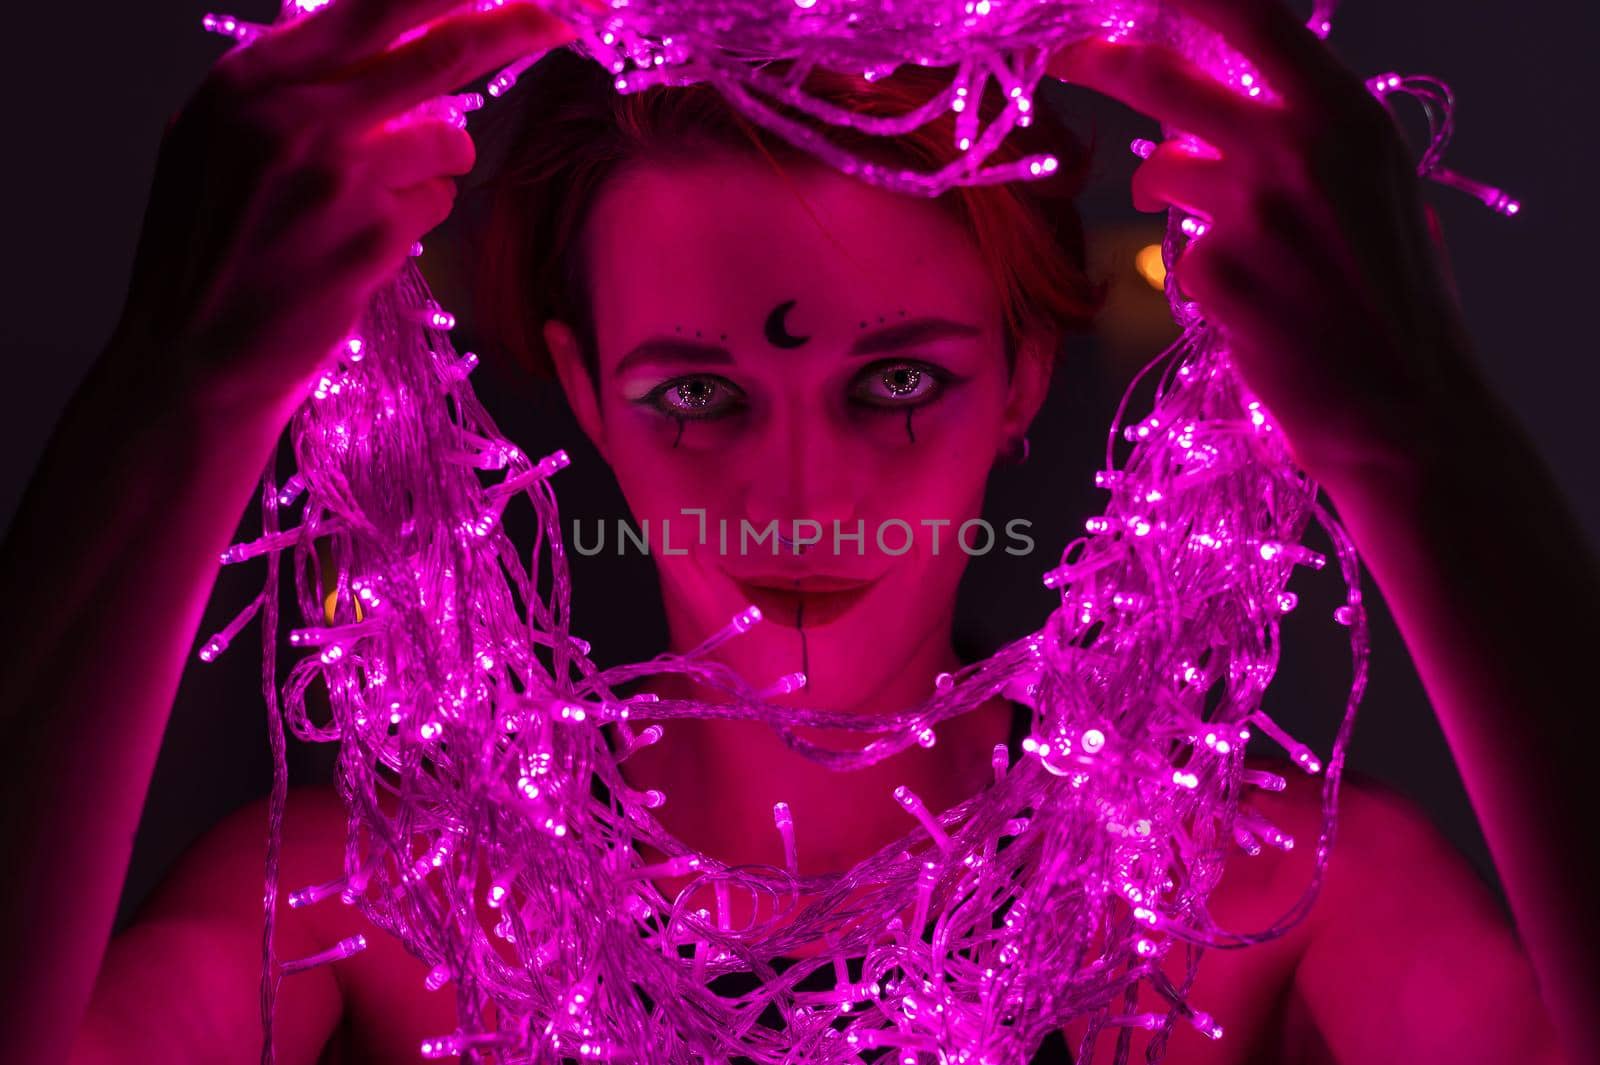 Woman with witch makeup and an earring in her nose. The girl holds a garland of flickering pink lights near her face. Light bulbs illuminate the witch's face in the dark. by mrwed54